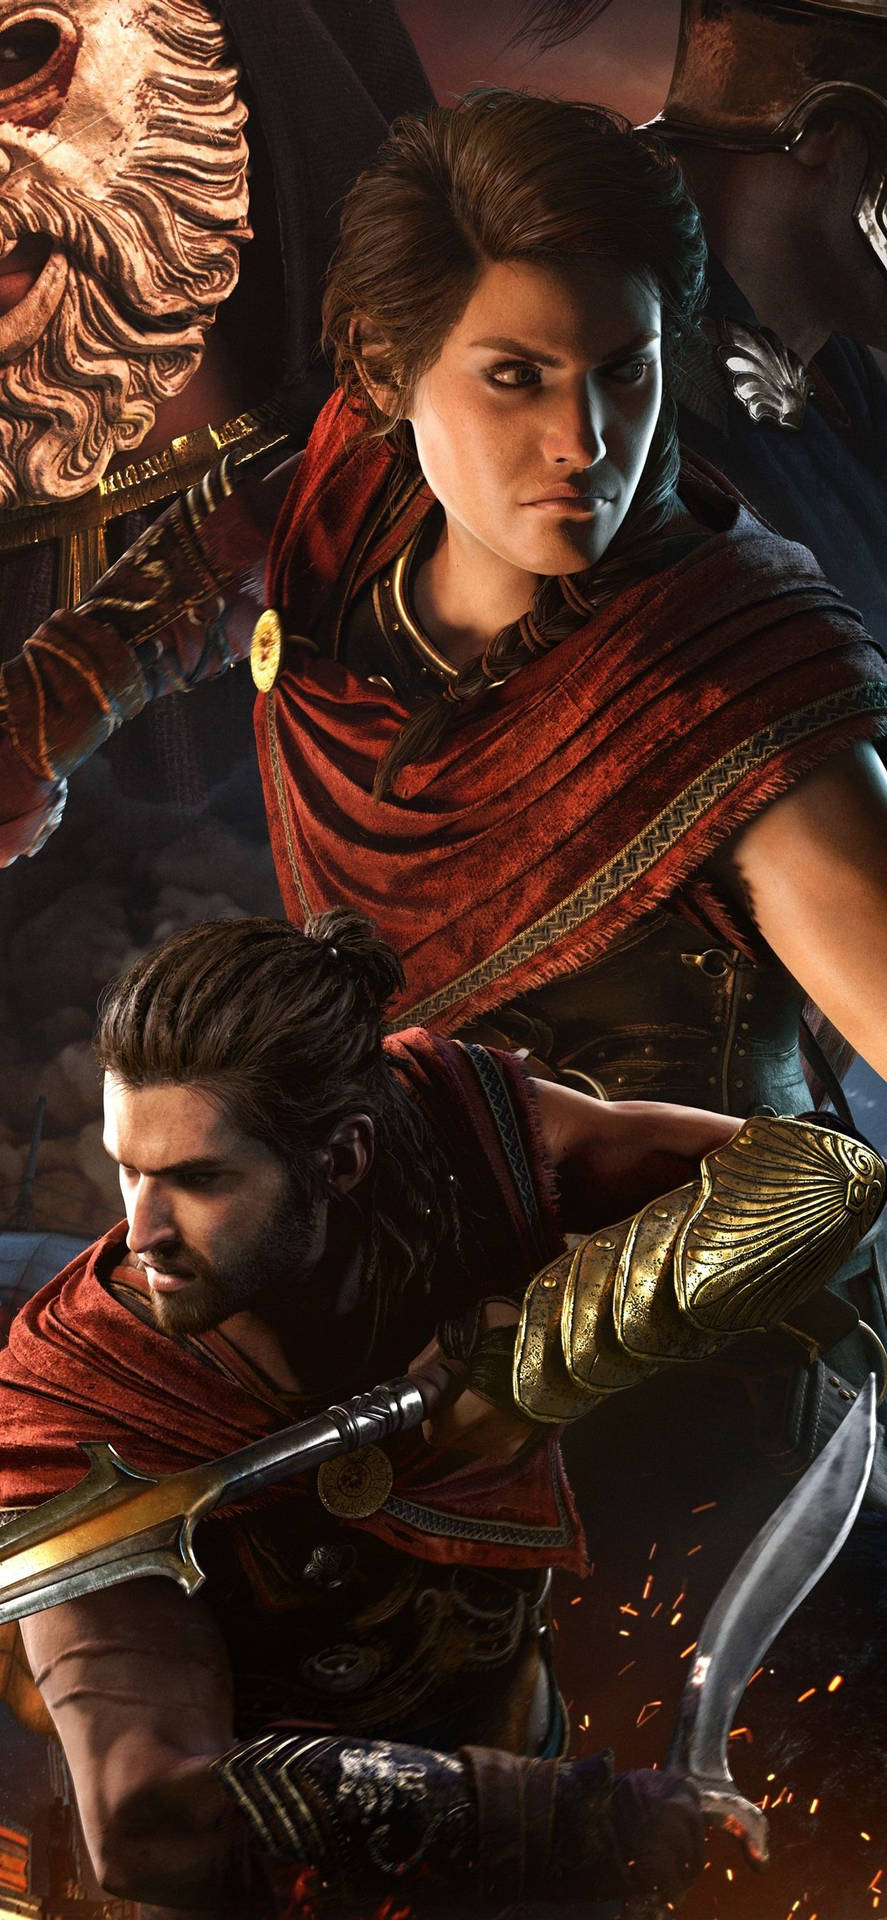 Kassandra And Alexios Of Assassin's Creed Odyssey Iphone Background